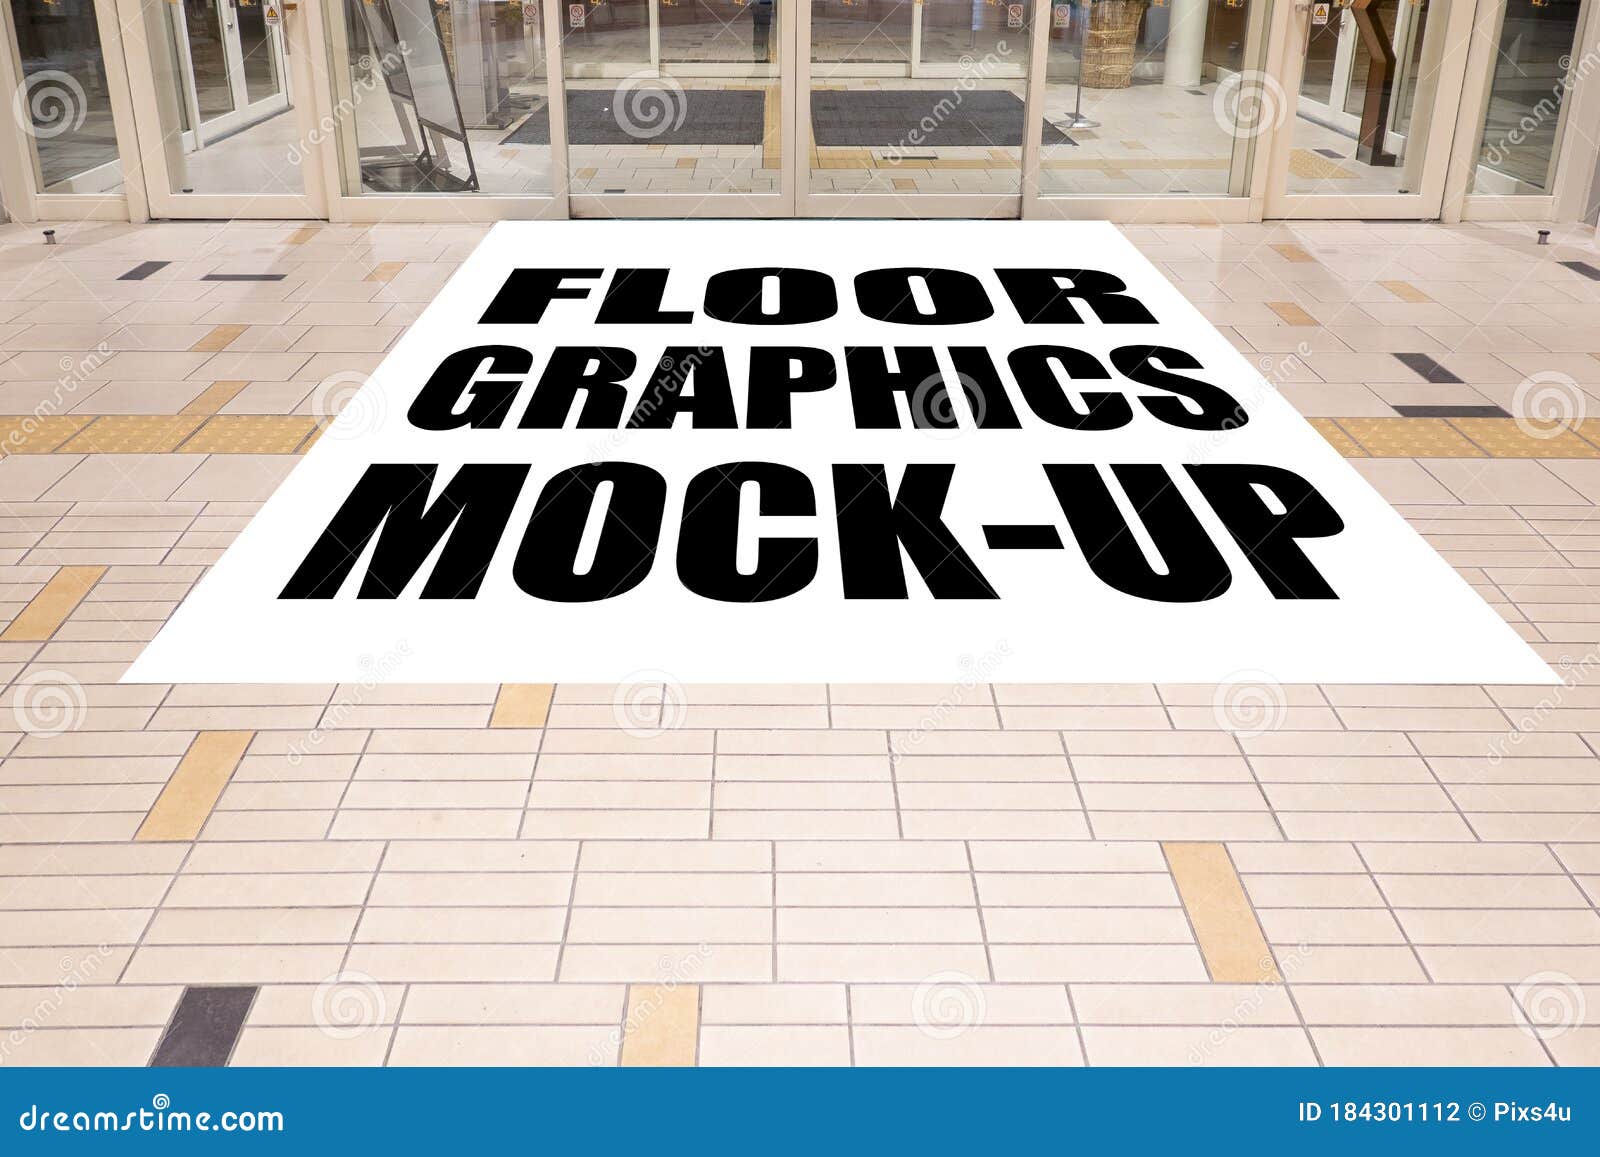 Download Mock Up Screen For Graphic On Floor Near Automatic Door Stock Illustration Illustration Of Clipping Advertisement 184301112